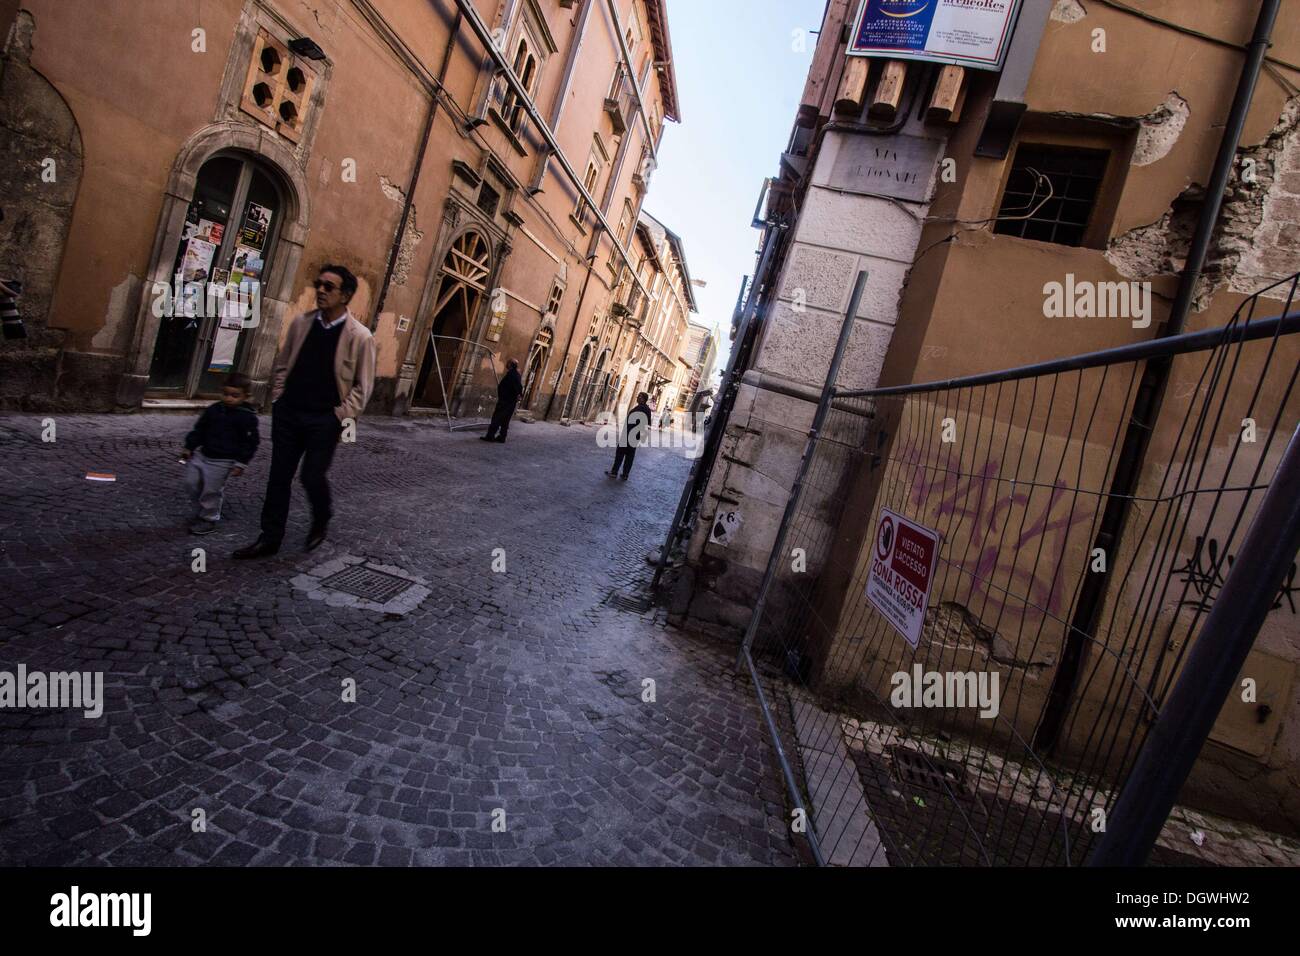 Oct. 26, 2013 - L'Aquila, Italy - People walk on October 25, 2013 in the historic area of LÌ¢??Aquila, destroyed by an earthquake four years ago, on April 6, 2009. Four years after, the historic center is still abandoned, the reconstruction process is slow outside of commercial premises and the city's churches and monuments are still covered in scaffolding.Photo: Manuel Romano/NurPhoto (Credit Image: © Manuel Romano/NurPhoto/ZUMAPRESS.com) Stock Photo